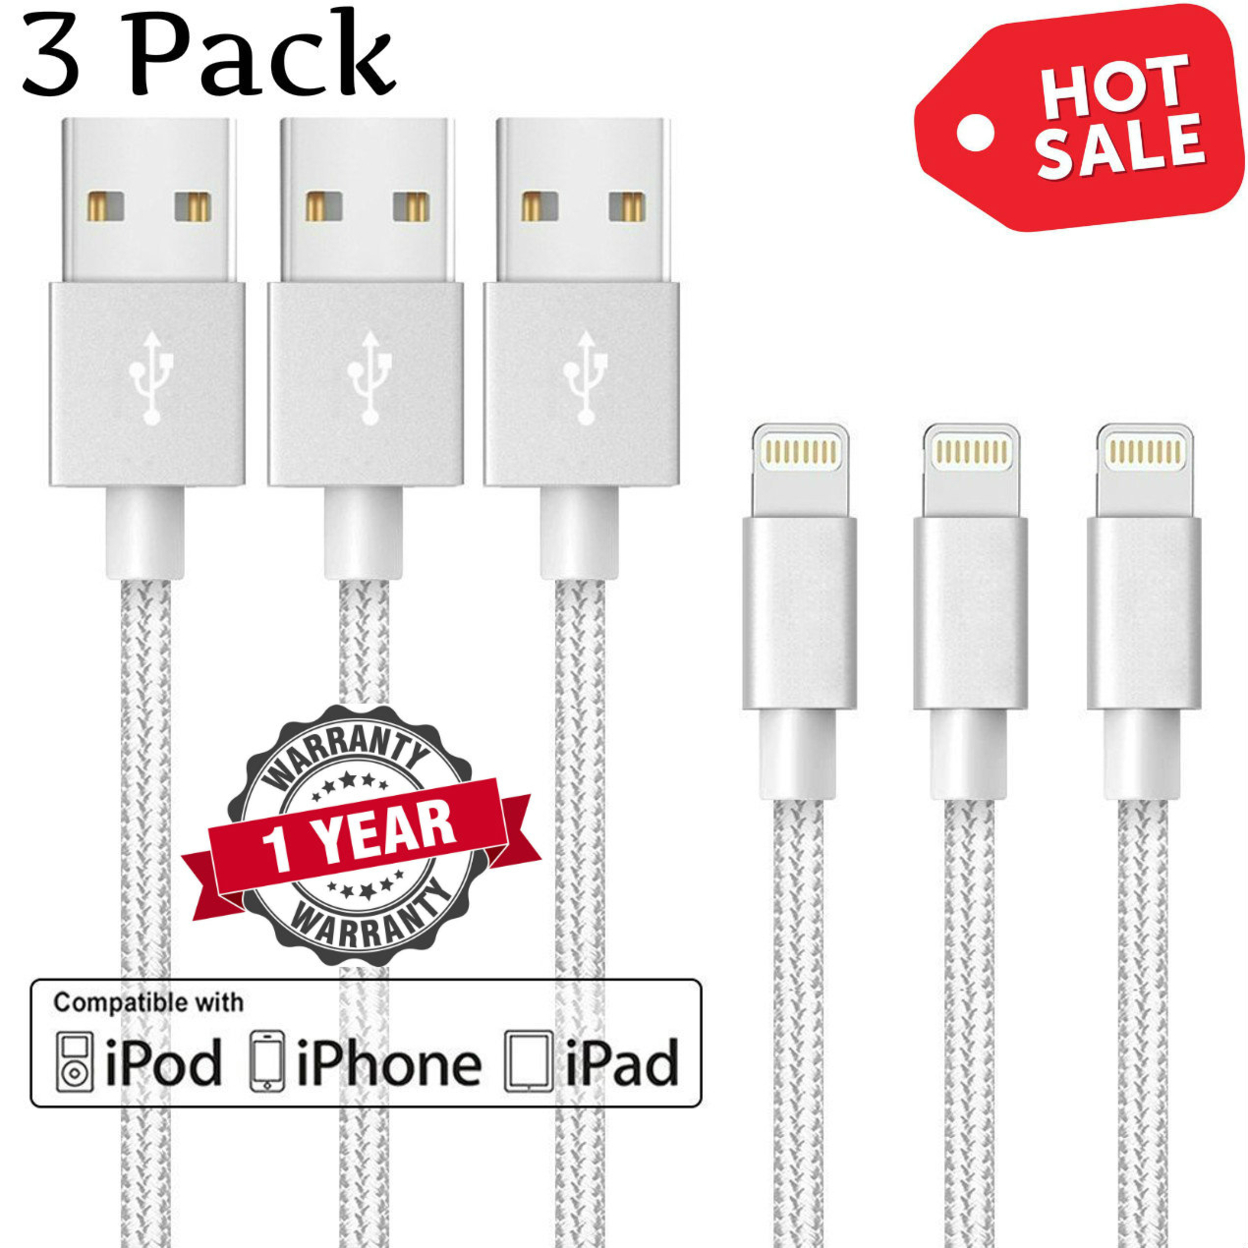 6 FT Heavy Duty Braided 8 Pin USB Charger Cable Cord For Apple IPhone - White, 2